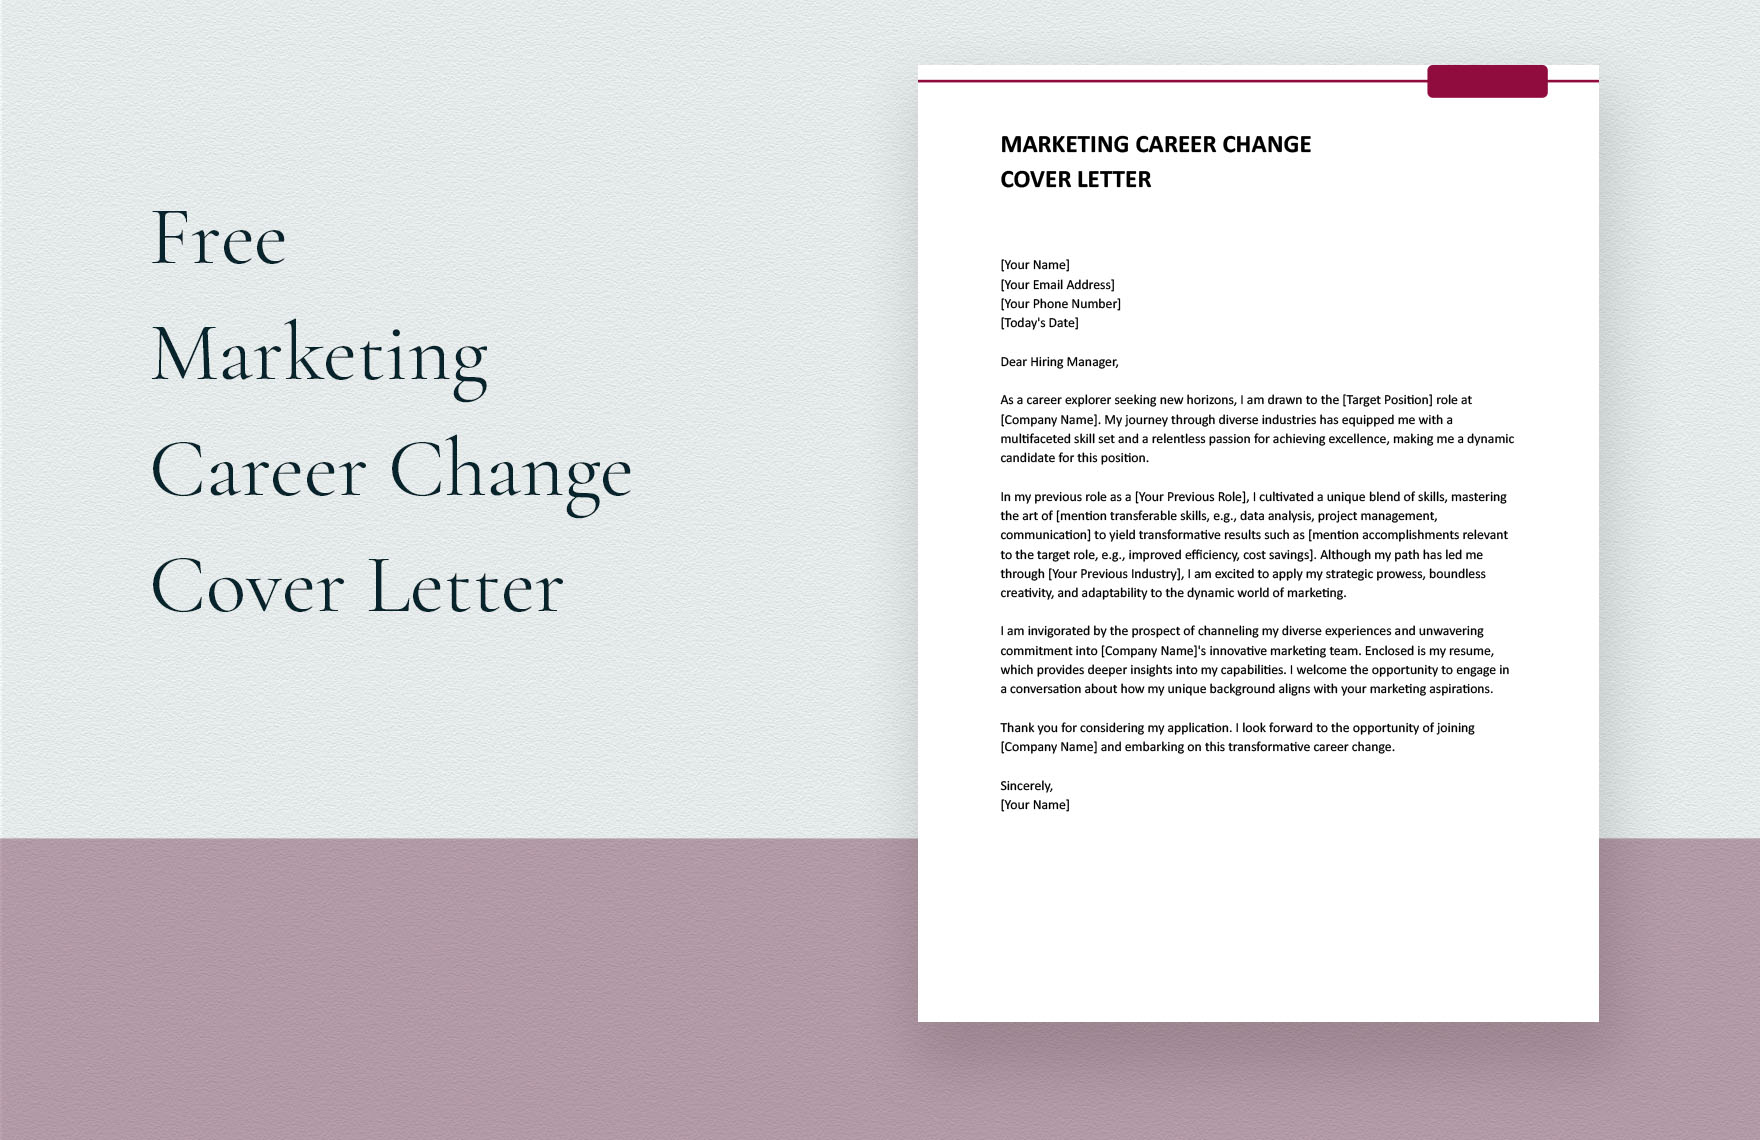 Free Marketing Career Change Cover Letter in Word, Google Docs